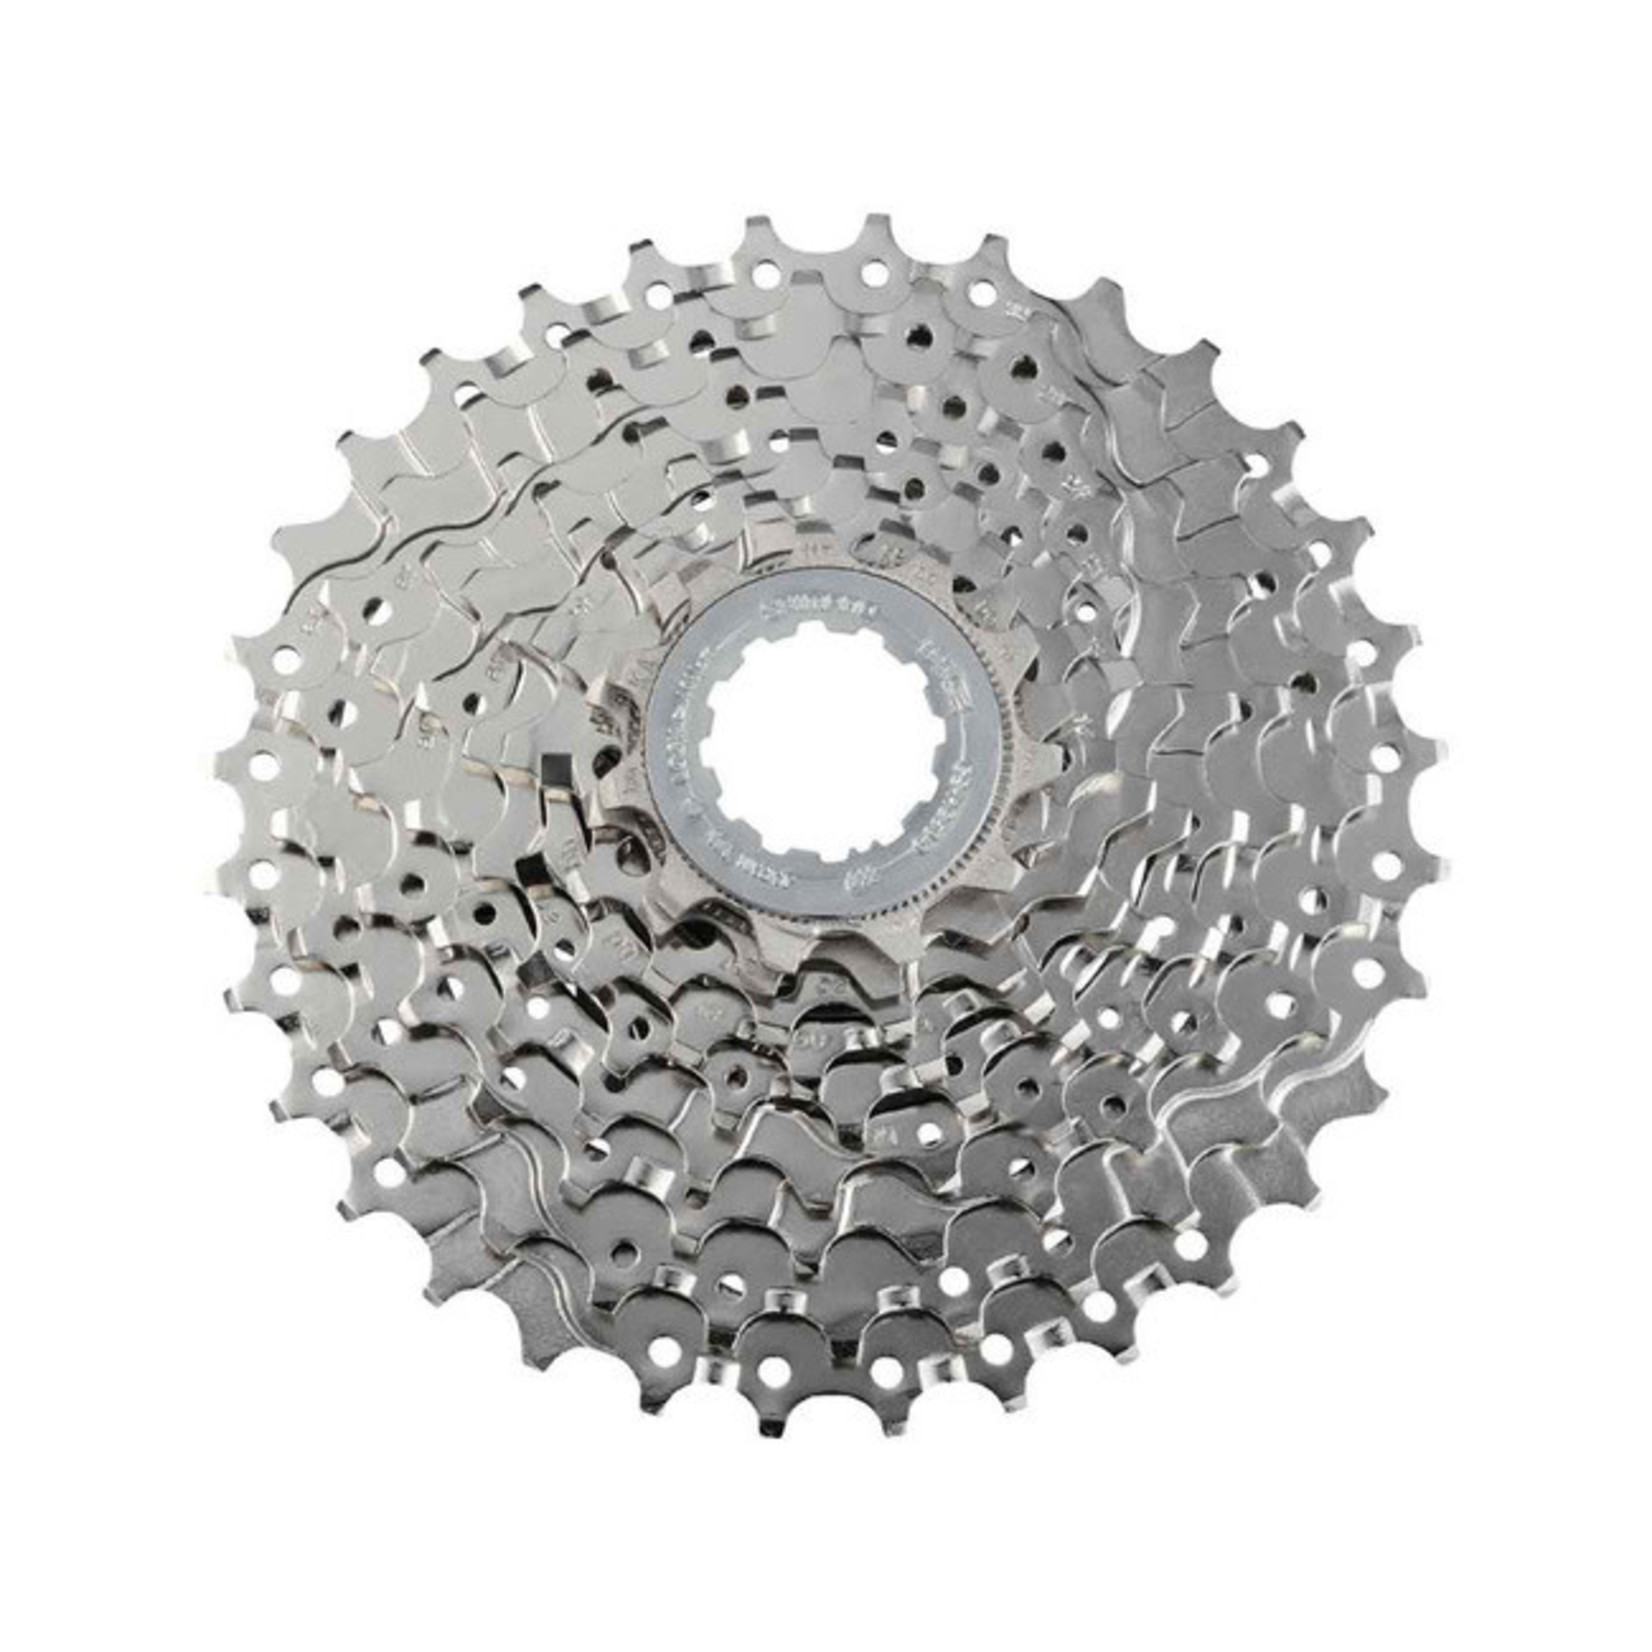 Shimano CASSETTE SPROCKET, CS-HG50 8-SPEED NI-PLATED 12-25T